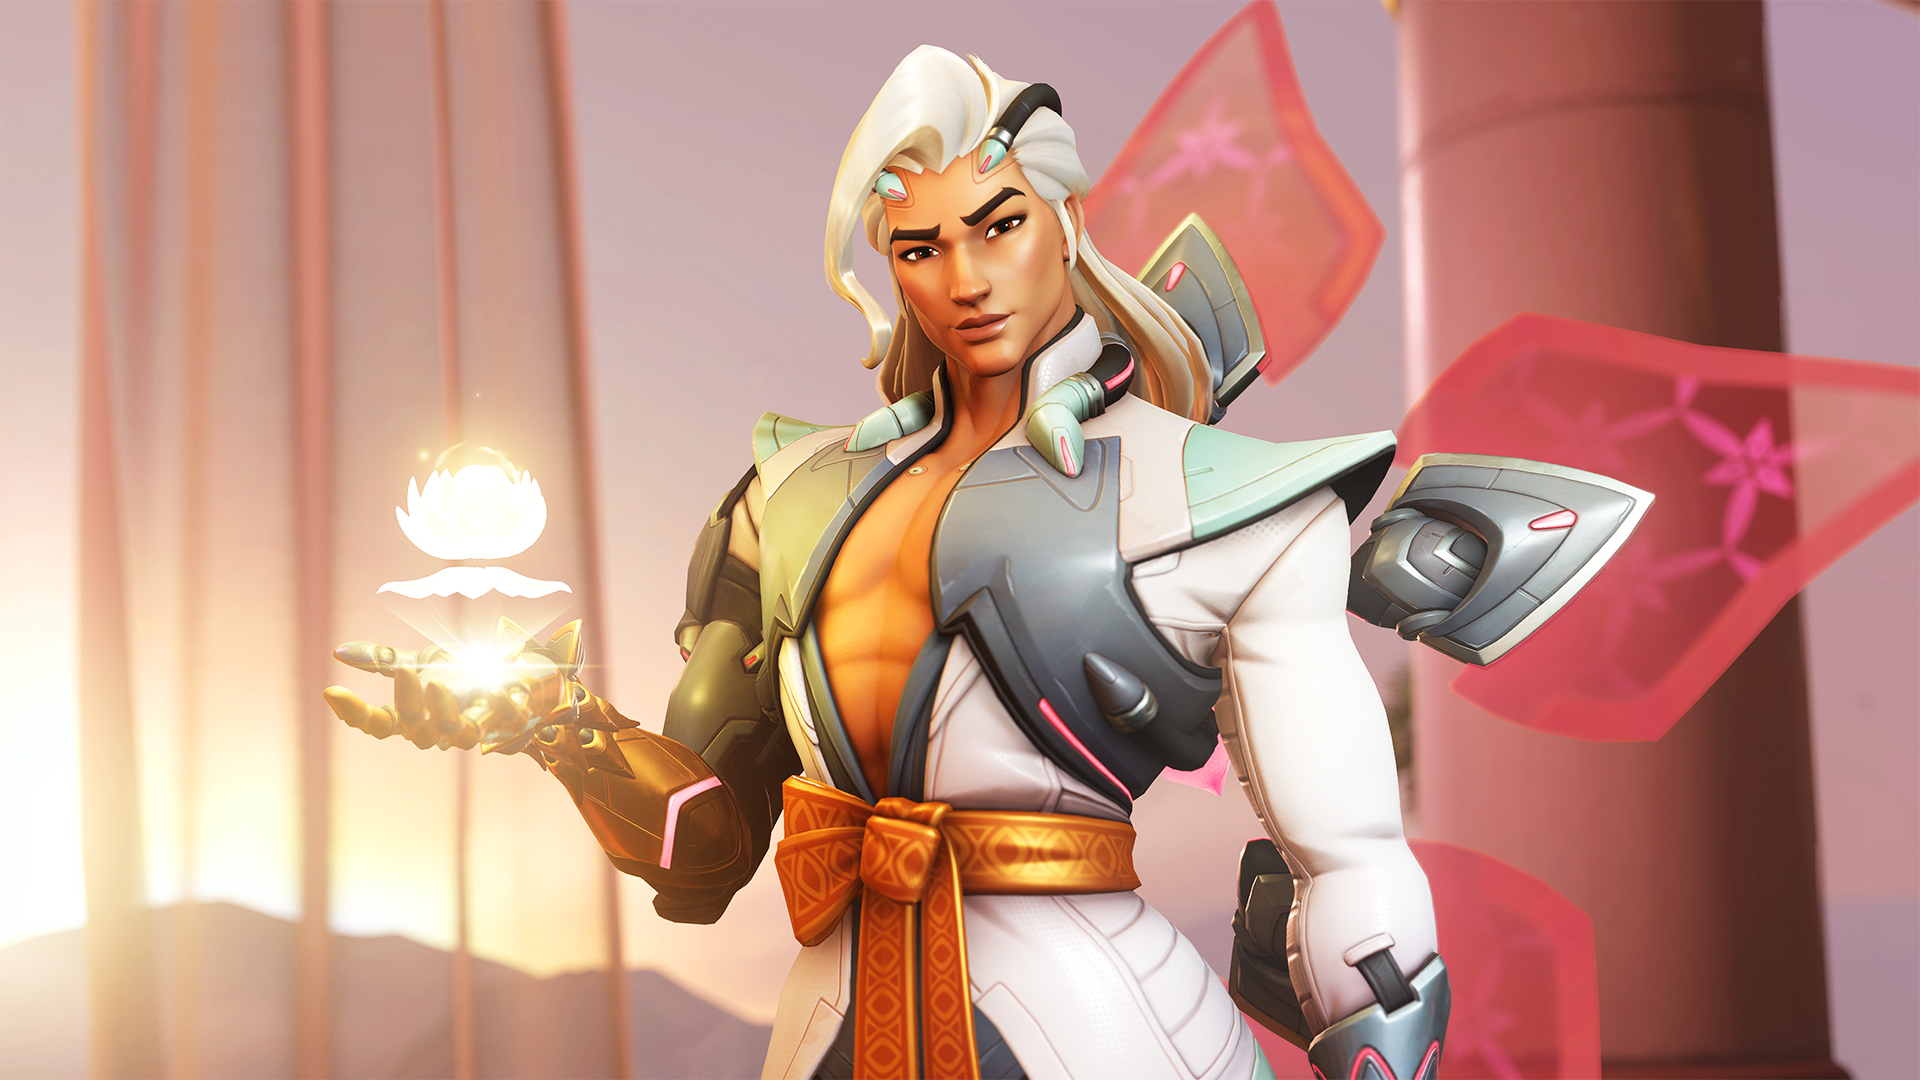  Overwatch 2's new support hero can sabotage his own team, but Blizzard hopes players will behave 